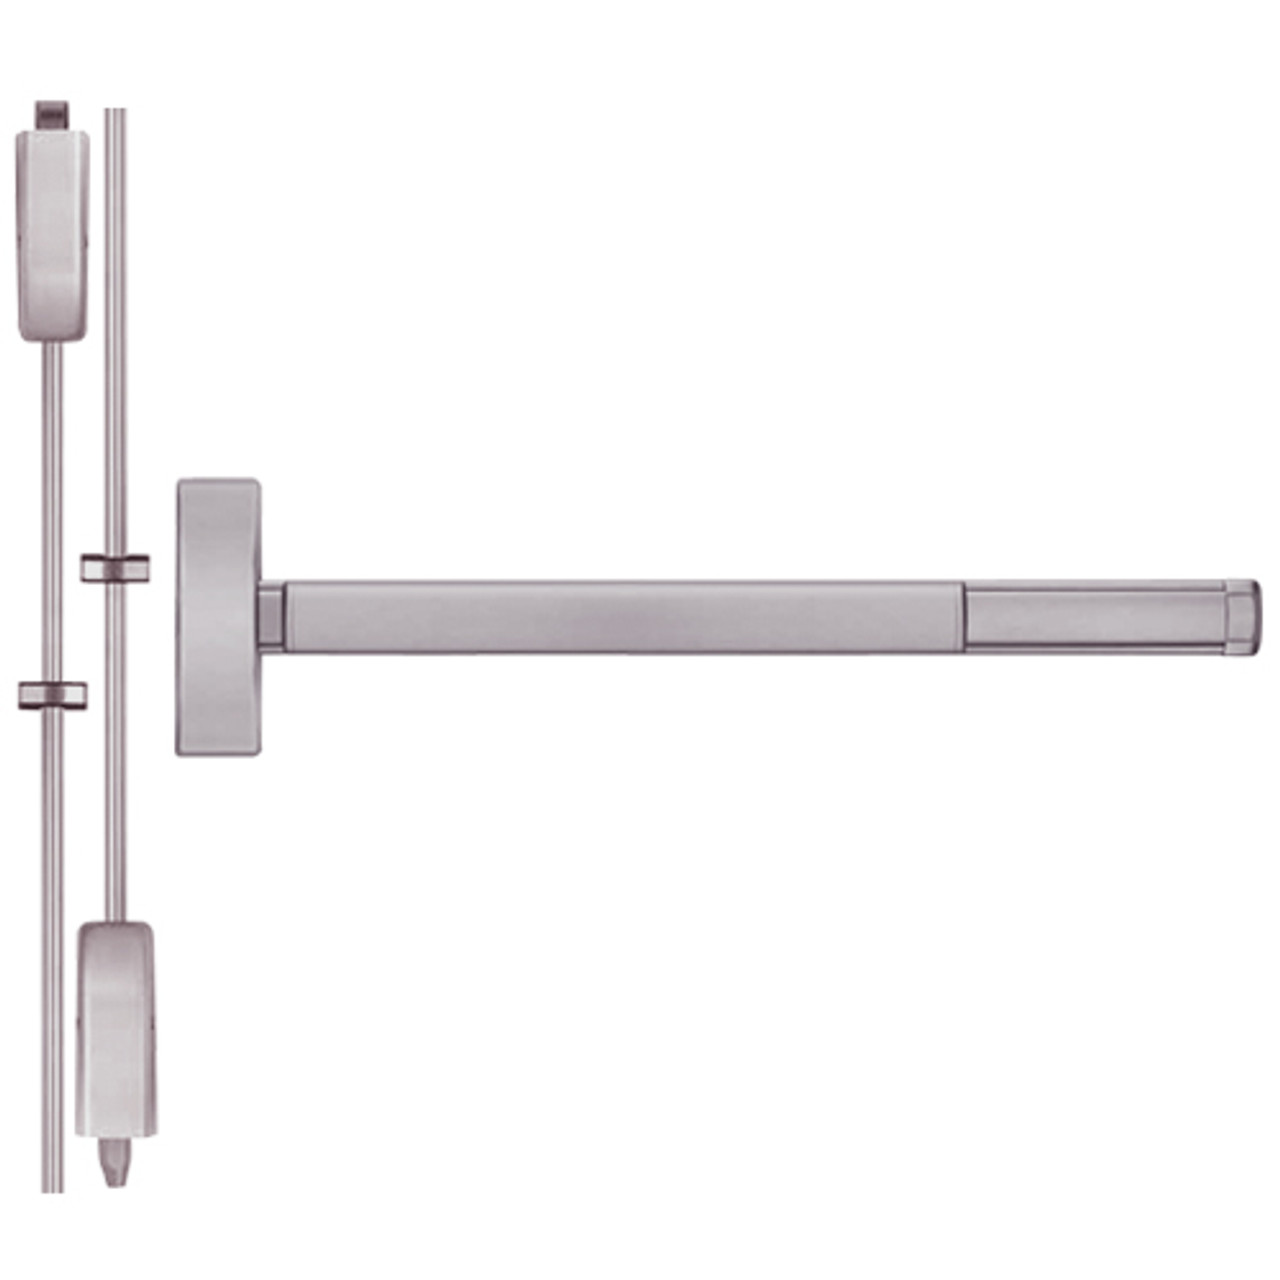 DEFL2208-630-48 PHI 2200 Series Fire Rated Apex Surface Vertical Rod Device with Delayed Egress Prepped for Key Controls Lever/Knob in Satin Stainless Steel Finish